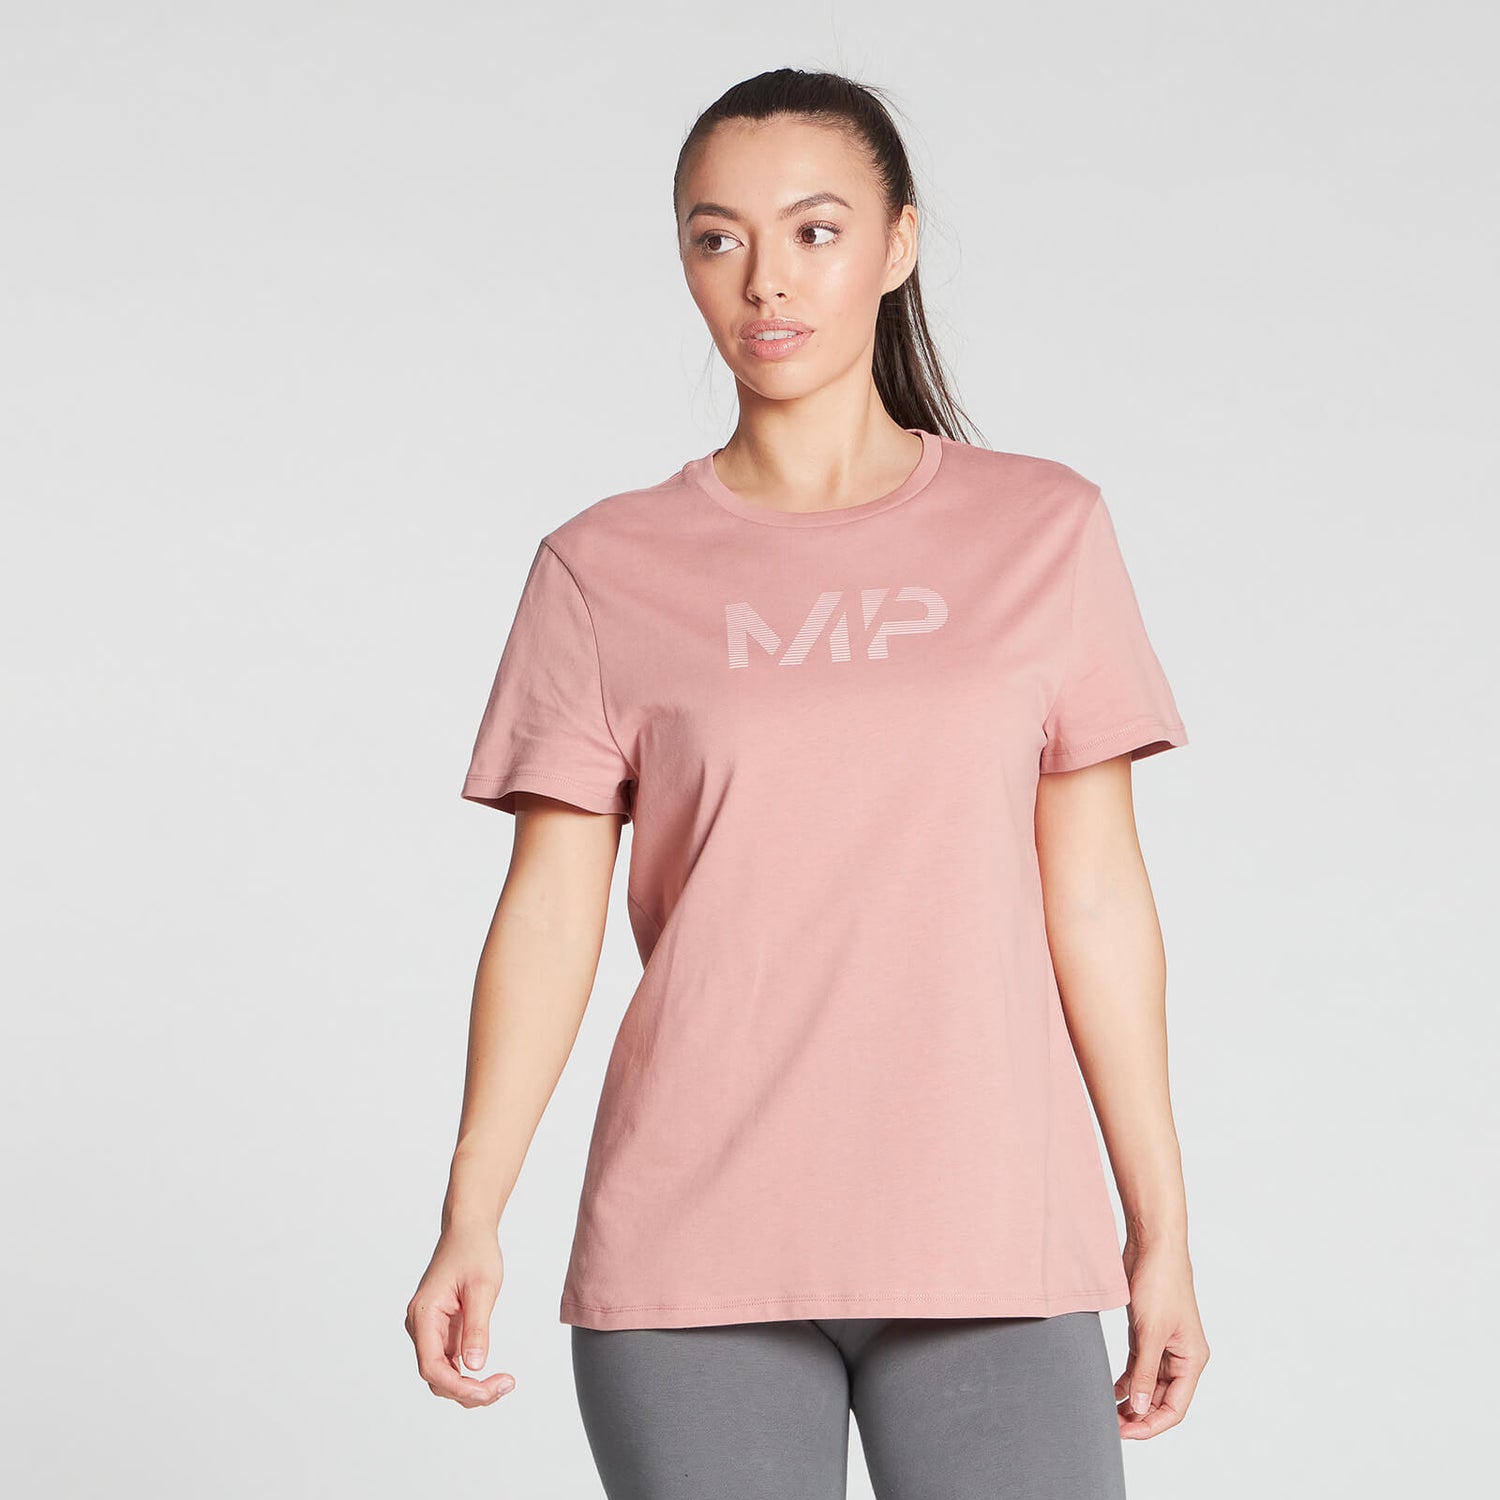 MP Women's Gradient Line Graphic T-Shirt - Washed Pink - XS